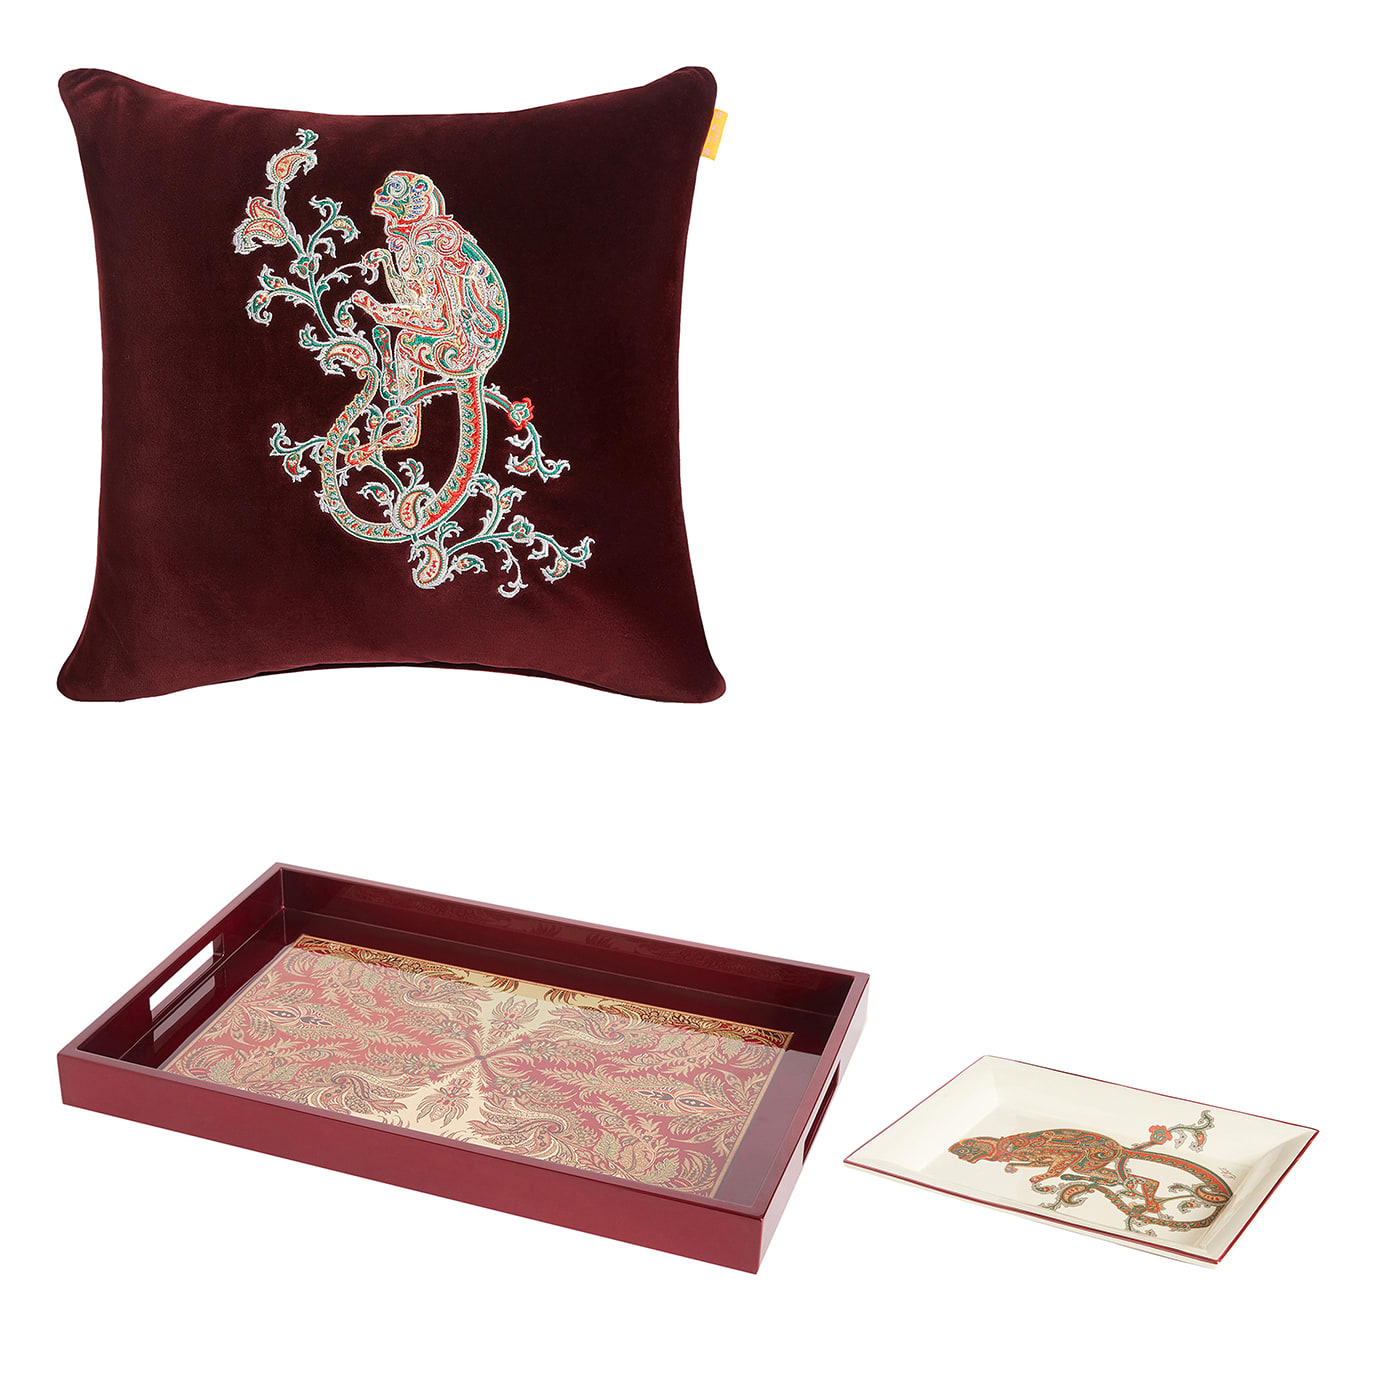 Set of 1 Louis Vide-Poche with 1 Byron Tray and 1 Casseaux Cushion - ETRO Home Accessory